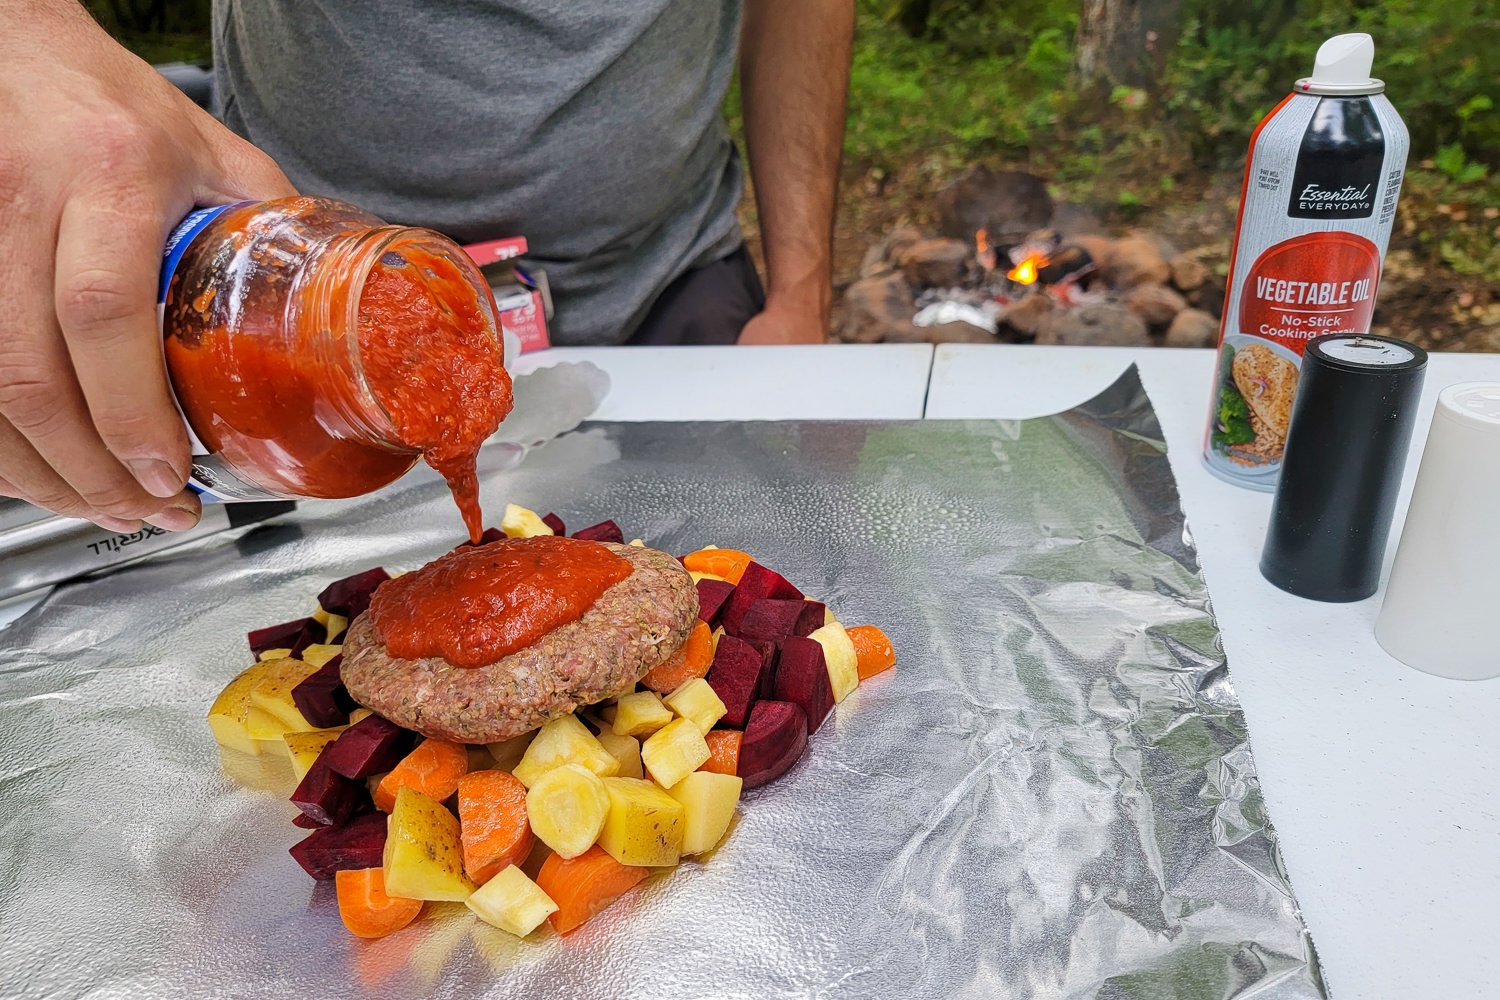 Pouring marinara sauce on top of a meat patty for the meatloaf and roasted veggies recipe